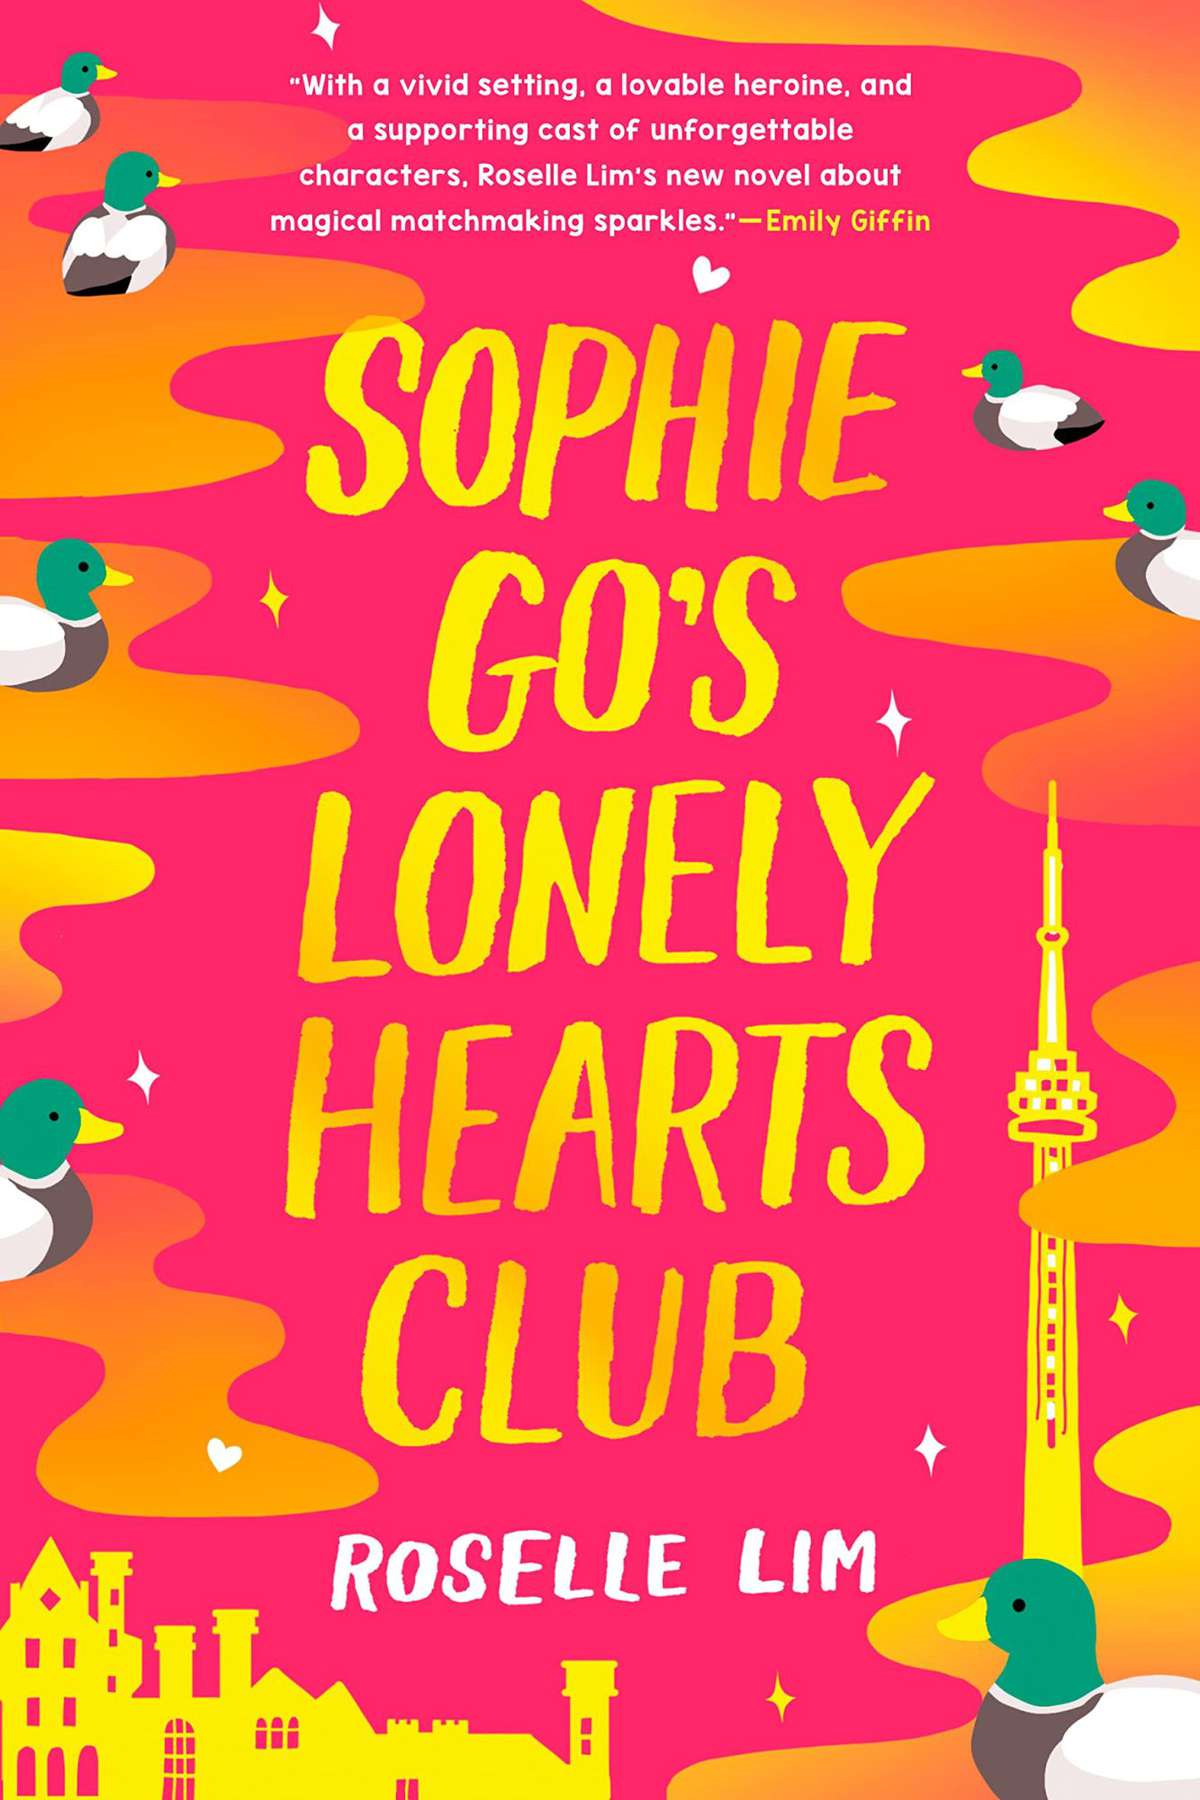 Sophie Go’s Lonely Hearts Club by Roselle Lim